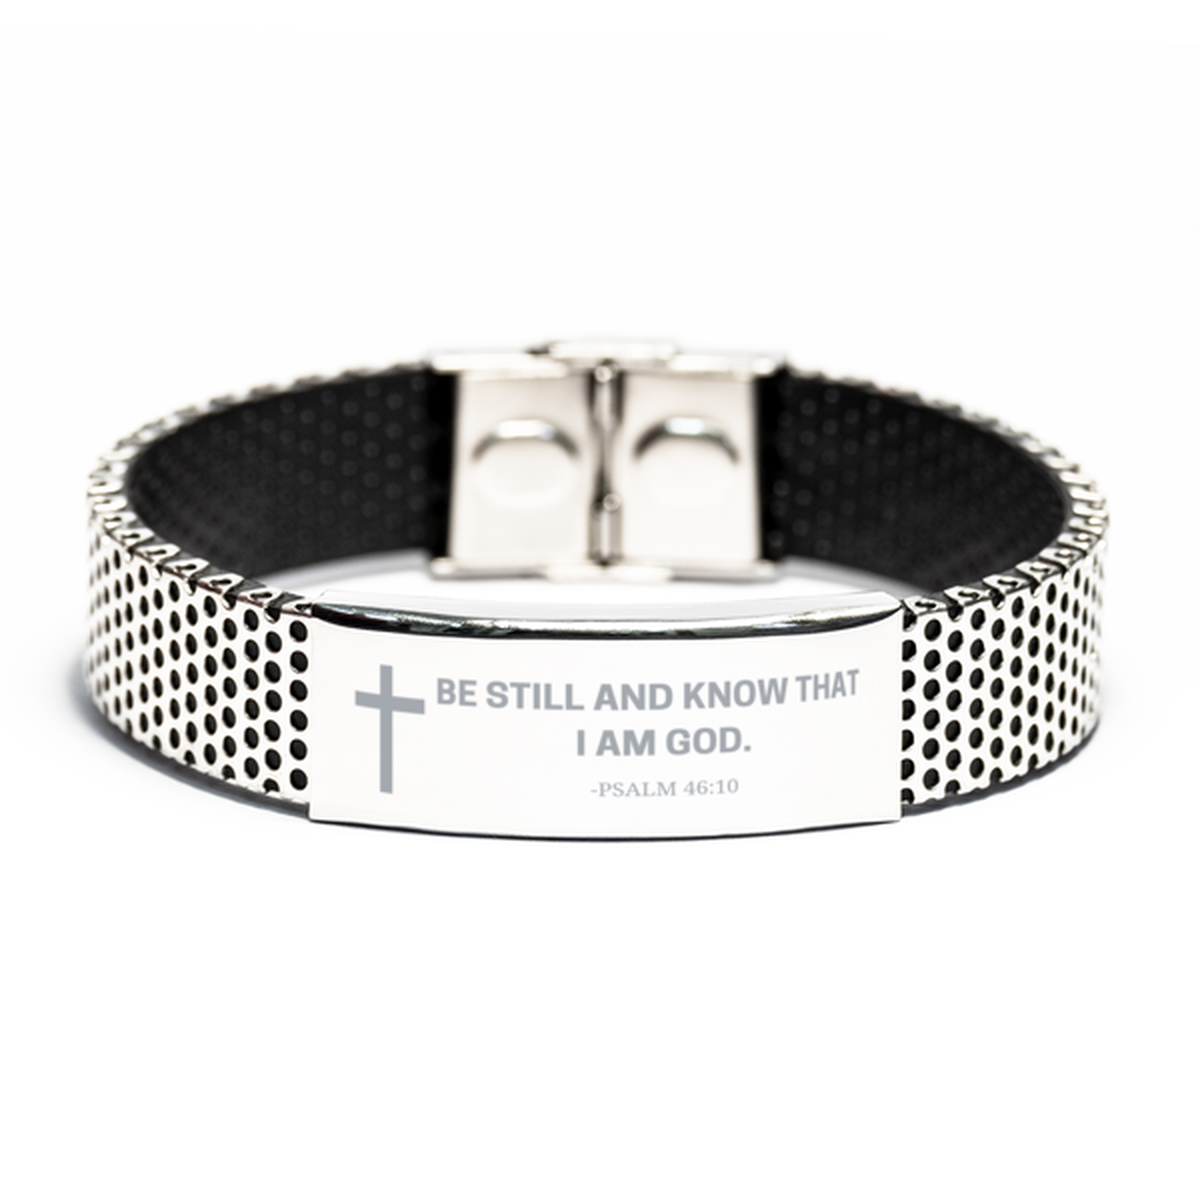 Baptism Gifts For Teenage Boys Girls, Christian Bible Verse Stainless Steel Bracelet, Be still and know that I am god, Catholic Confirmation Gifts for Son, Godson, Grandson, Nephew